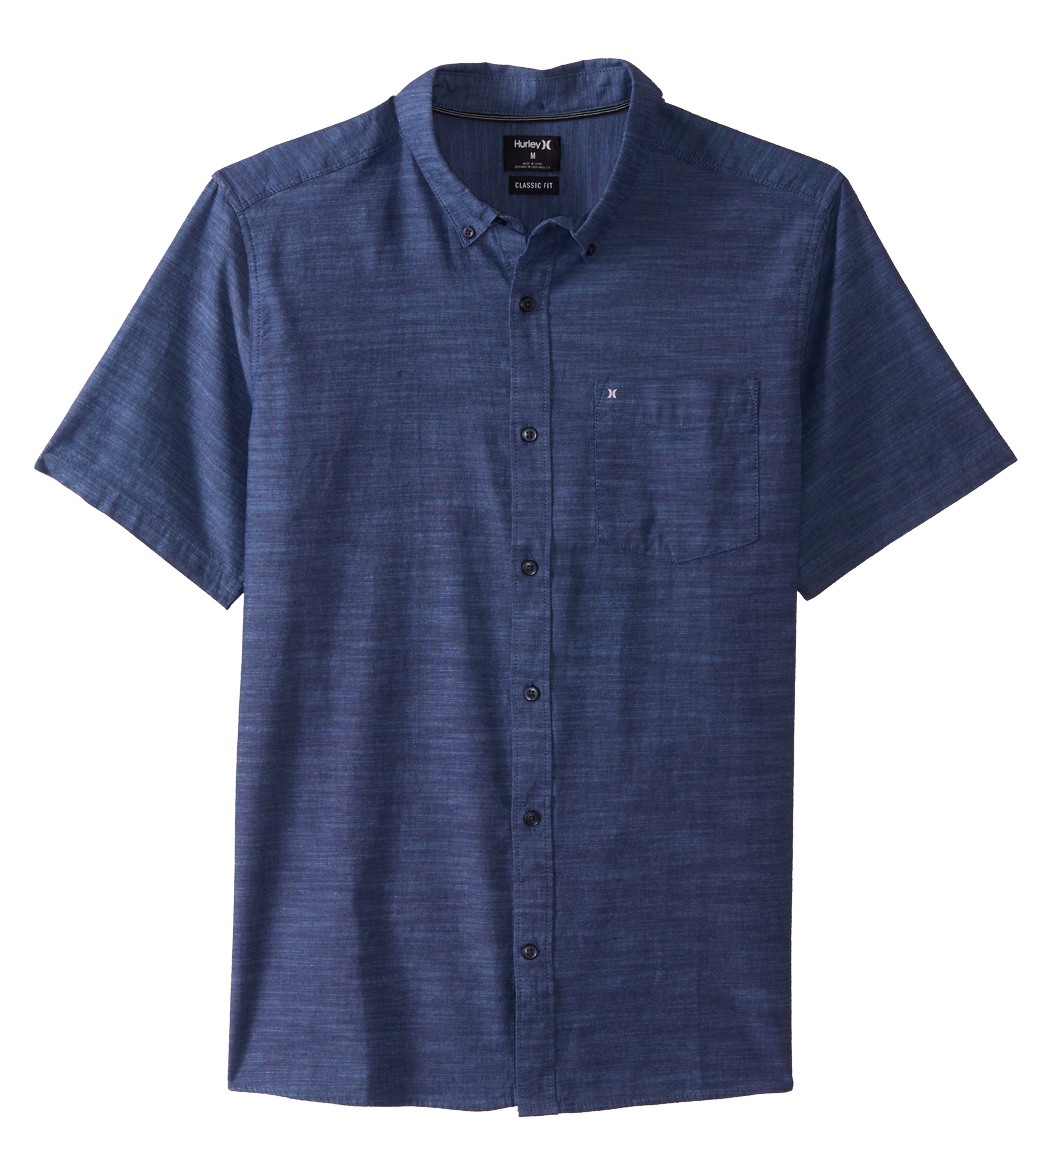 Hurley Men's One & Only 2.0 Short Sleeve Woven Shirt - Obsidian Small Cotton - Swimoutlet.com